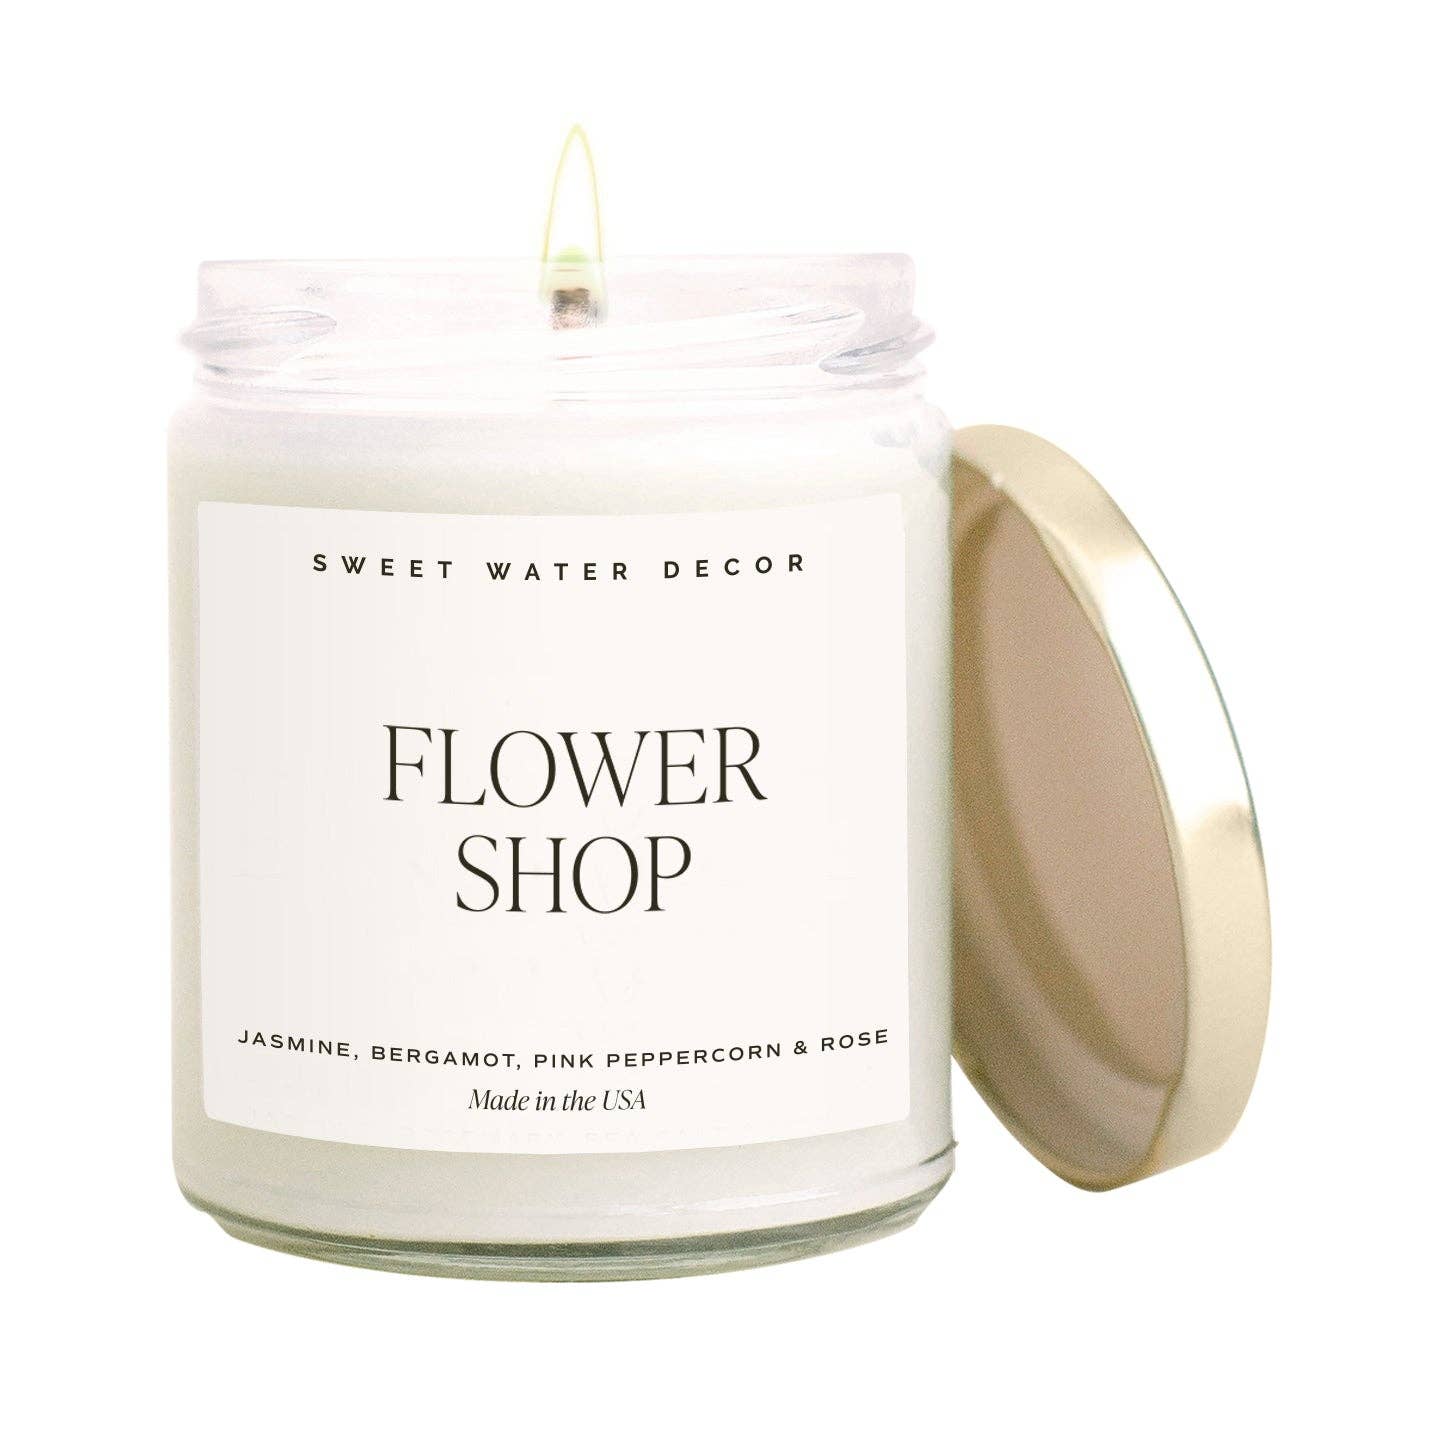 Sweet Water Decor - Flower Shop - 9 oz. Soy Candle